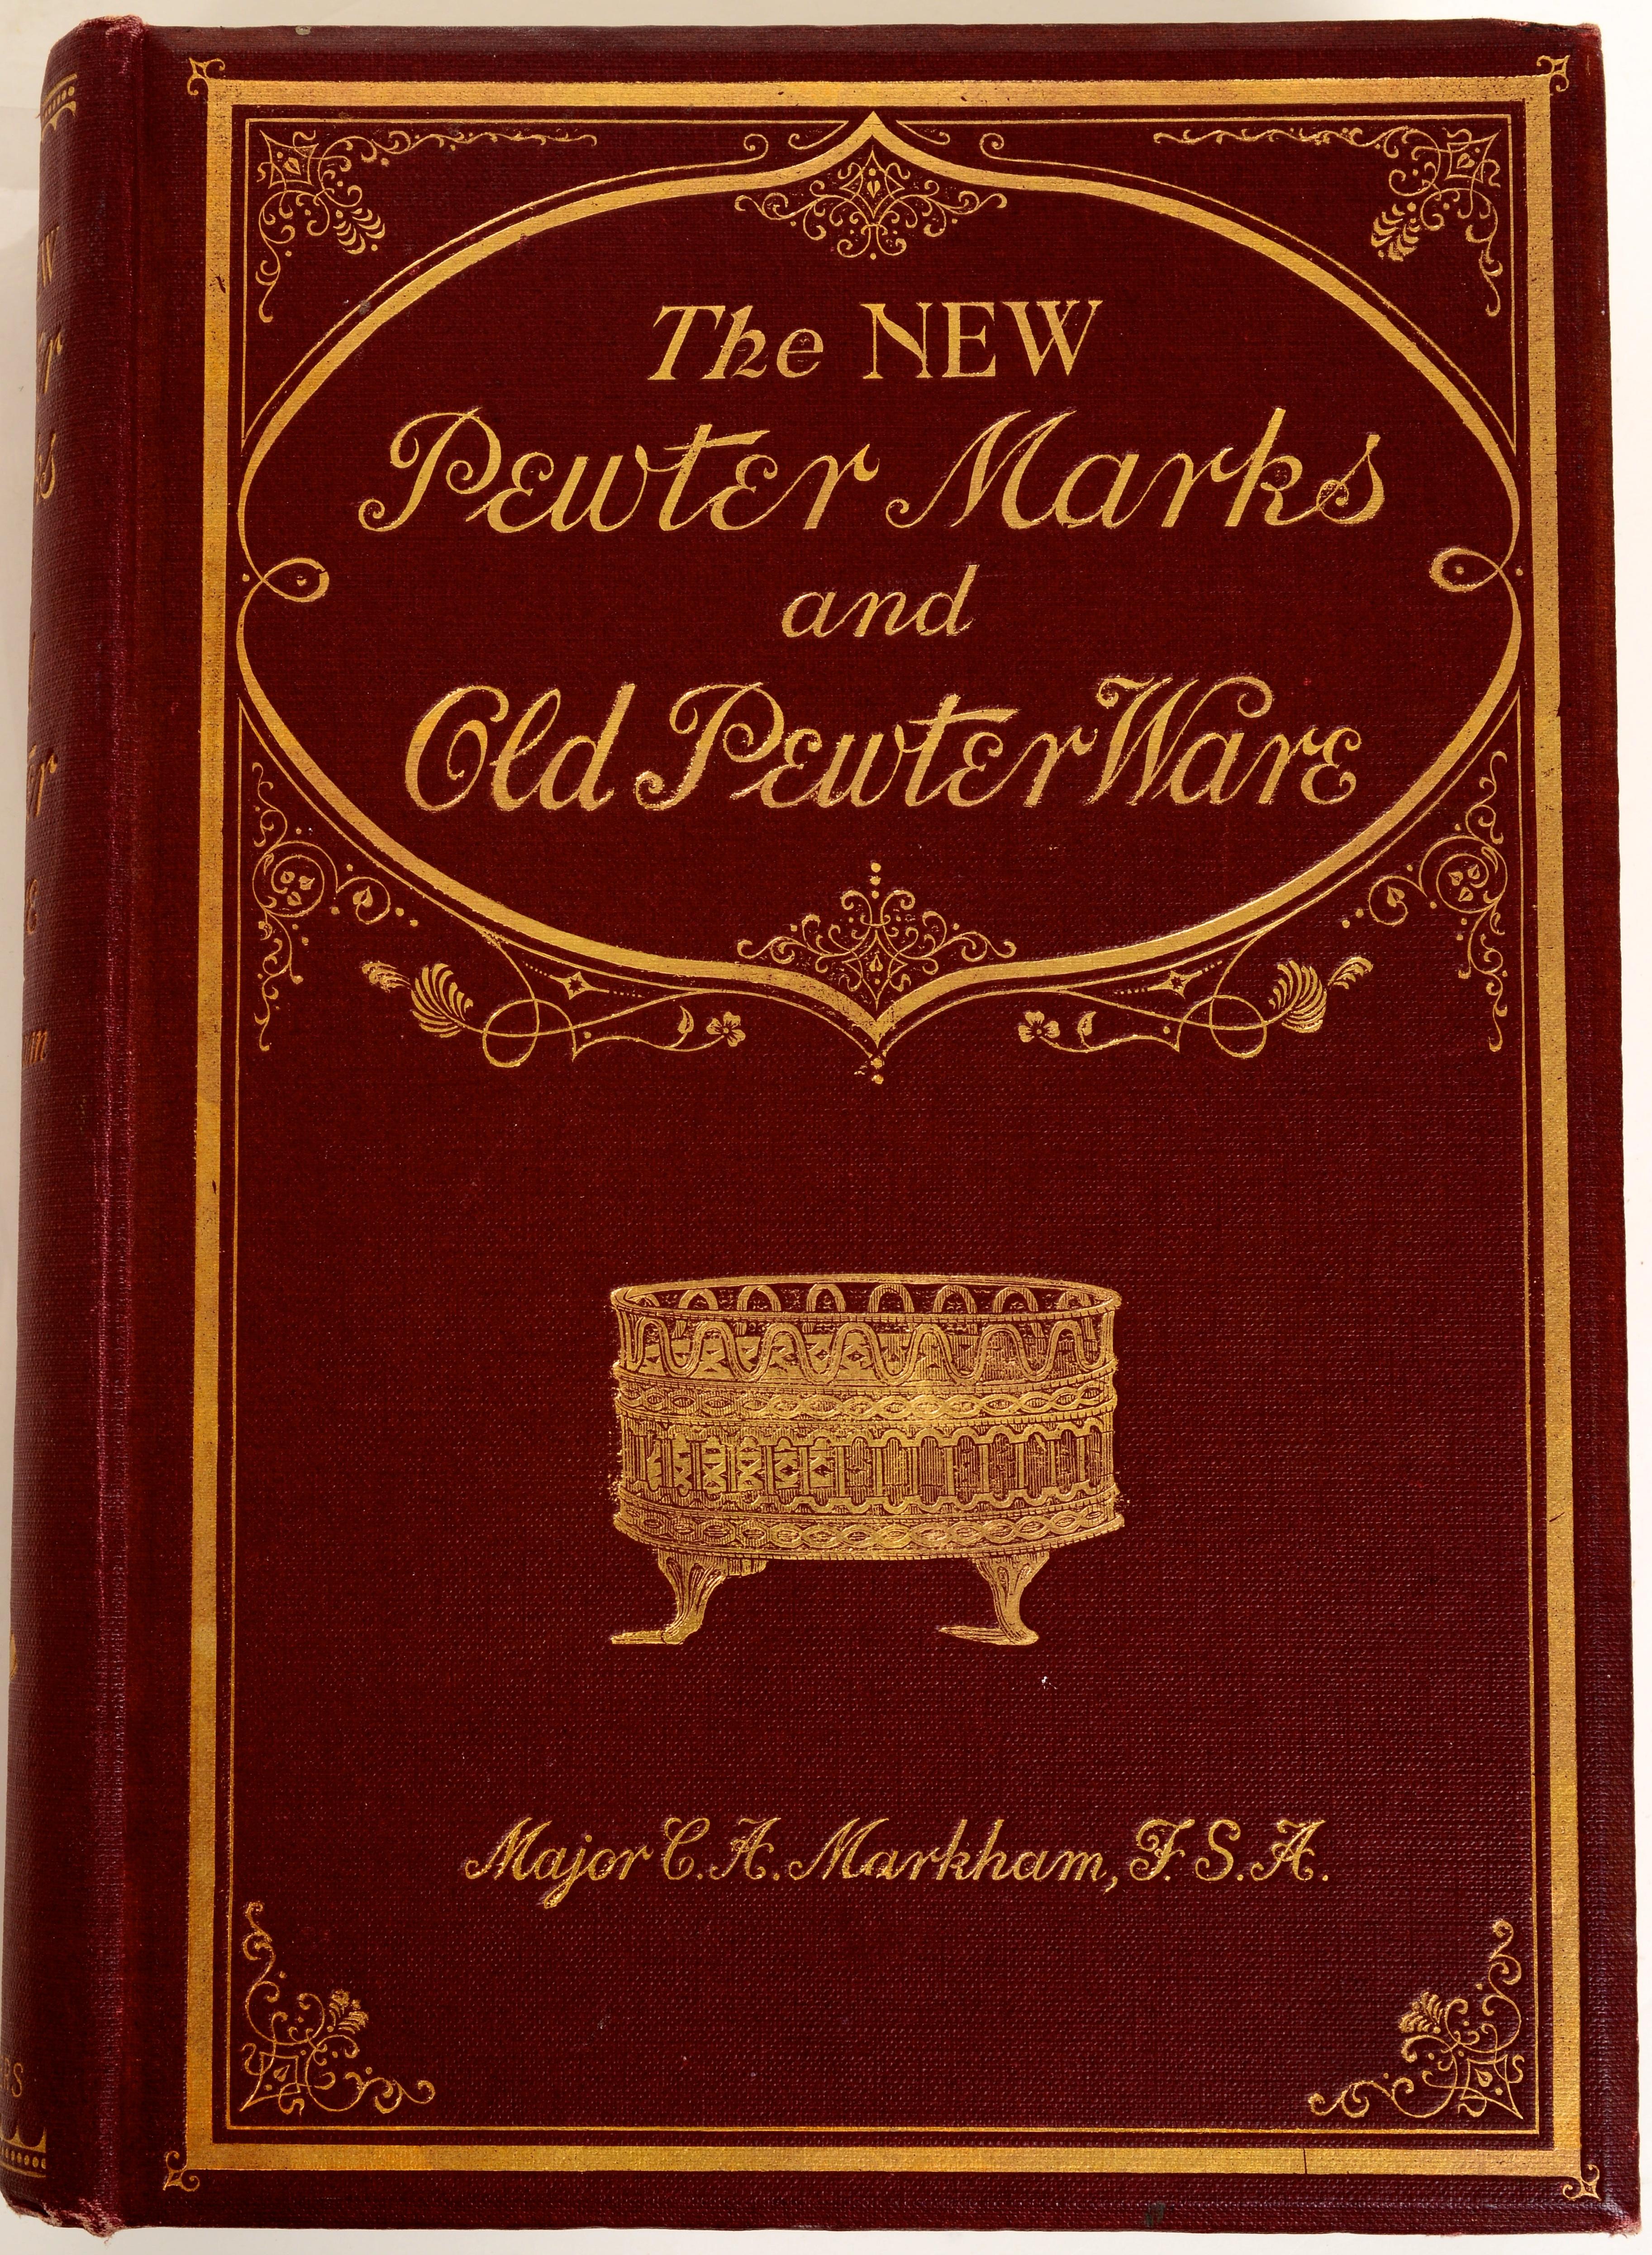 The New Pewter Marks and Old Pewter Ware by Major C.A. Markham, 2nd Ed 1928 For Sale